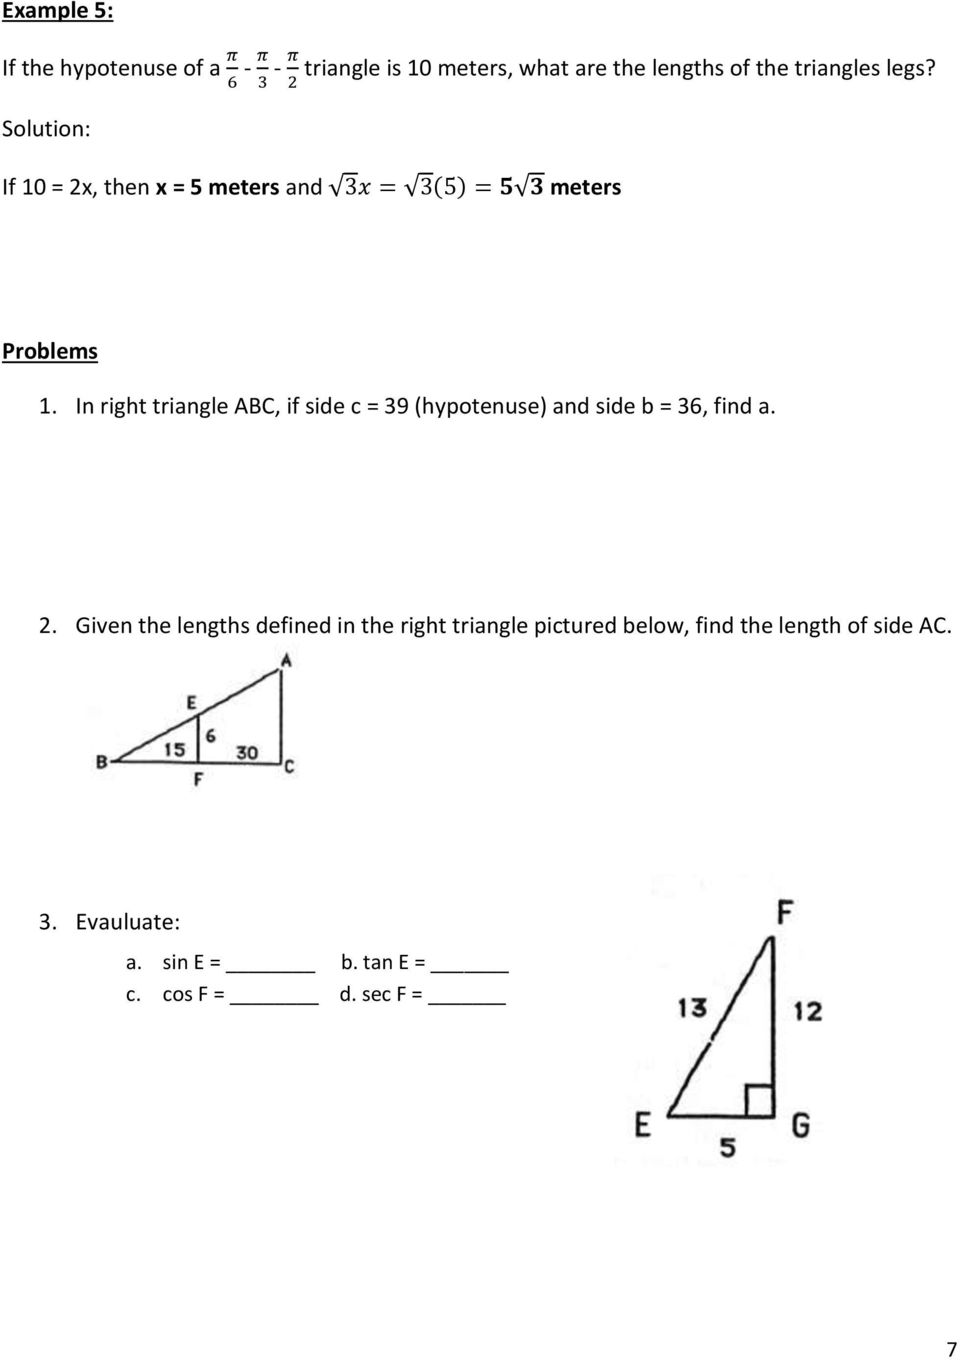 In right triangle ABC, if side c = 9 (hypotenuse) and side b = 6, find a.